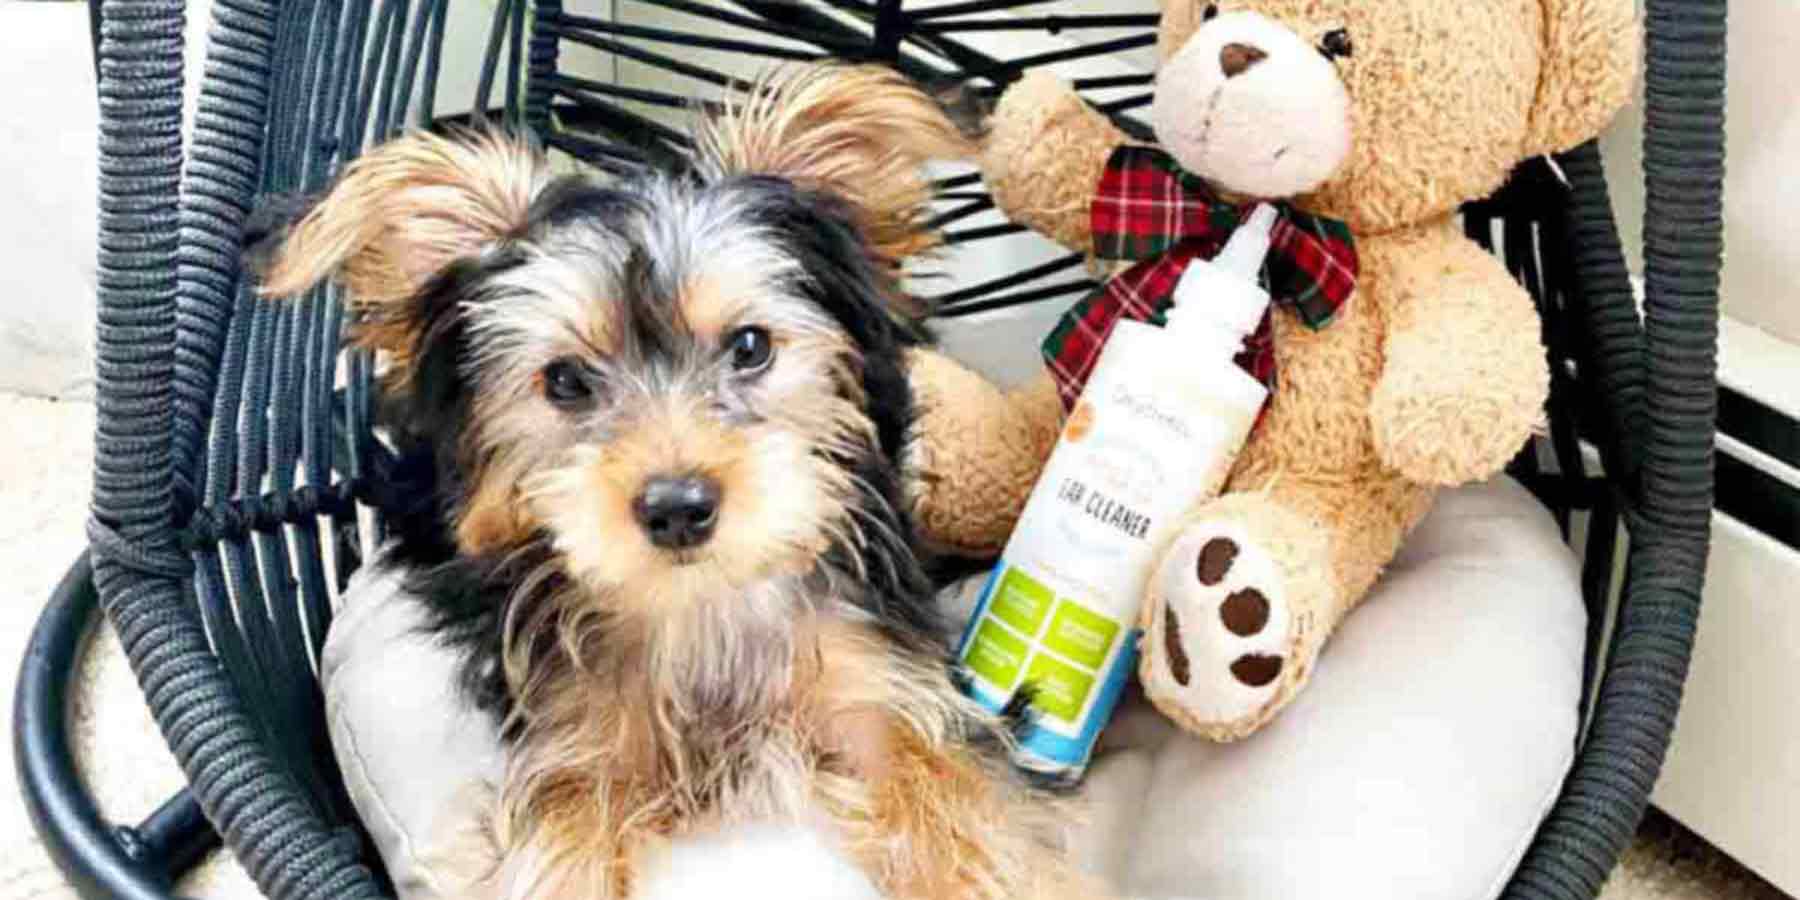 Social-Media-Post-From-Instagram-User-_ZBedgine-terrier-on-swing-next-to-bottle-of-oxyfresh-dog-ear-cleaner-for-stinky-ear-and-wax-dirt-removal